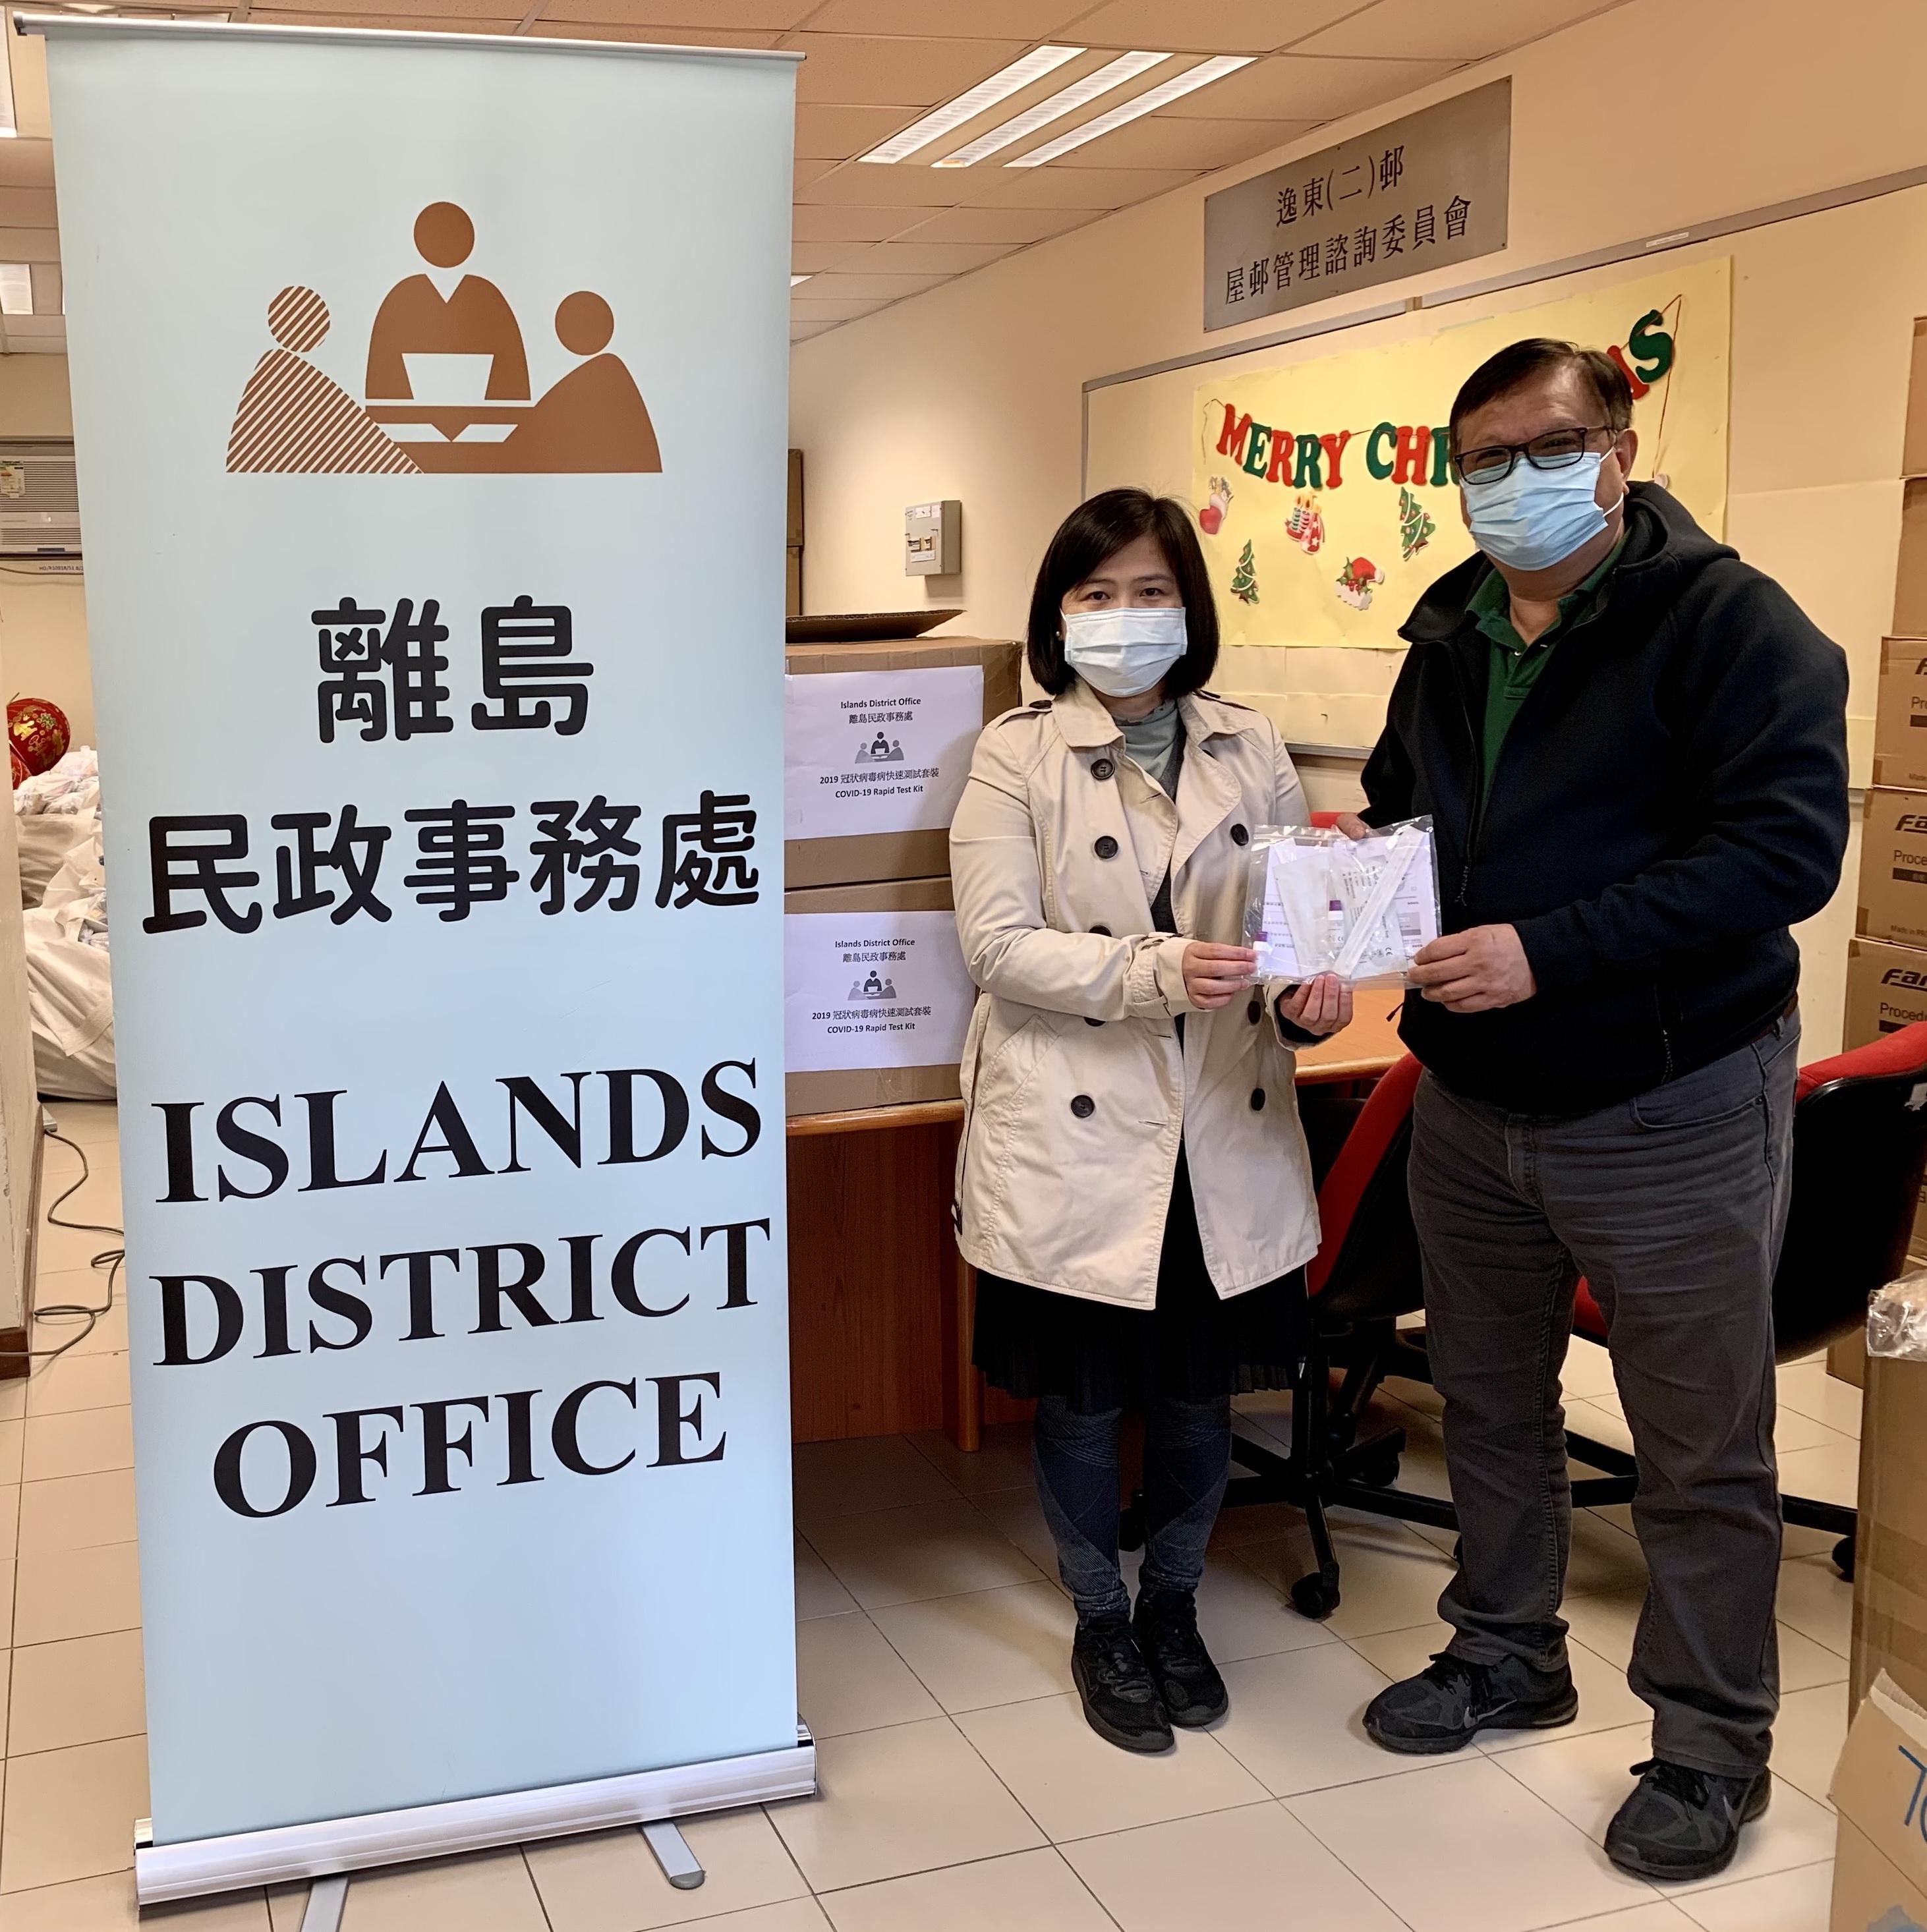 The Islands District Office today (February 15) distributed COVID-19 rapid test kits to cleansing workers and property management staff working in Yat Tung (II) Estate for voluntary testing through the Estate's property management company.